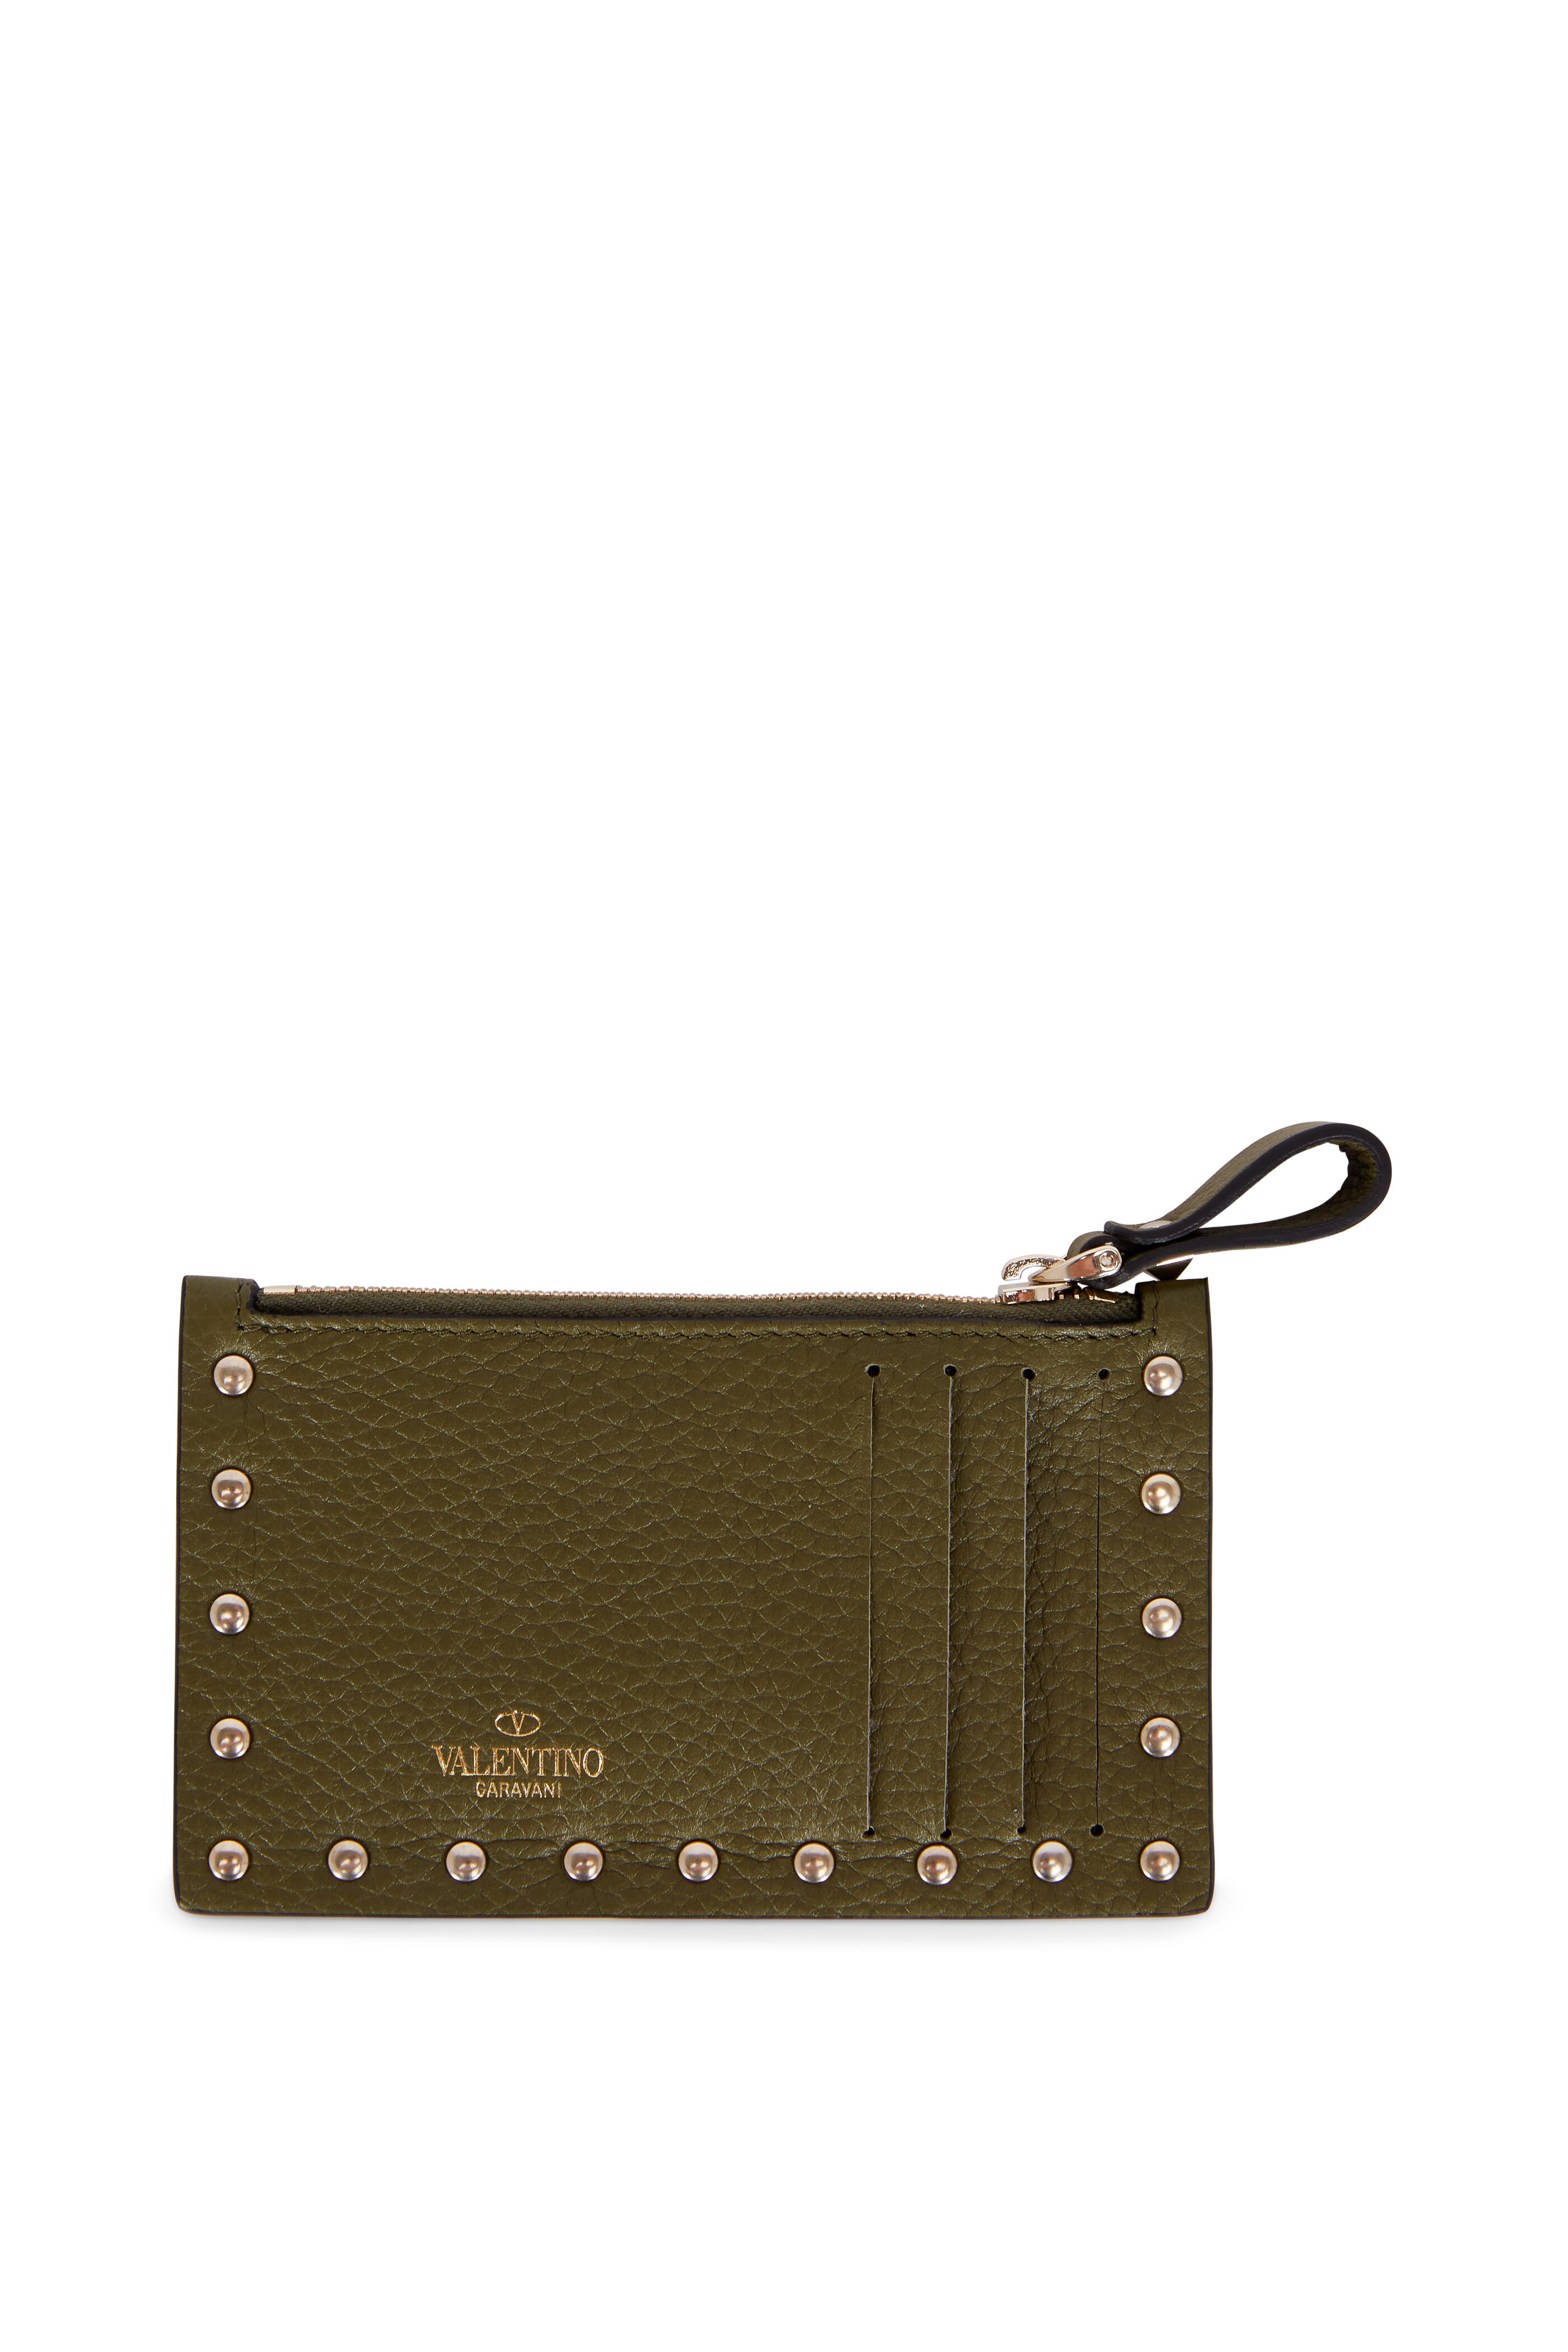 Military Green Saffiano leather Compact Wallet